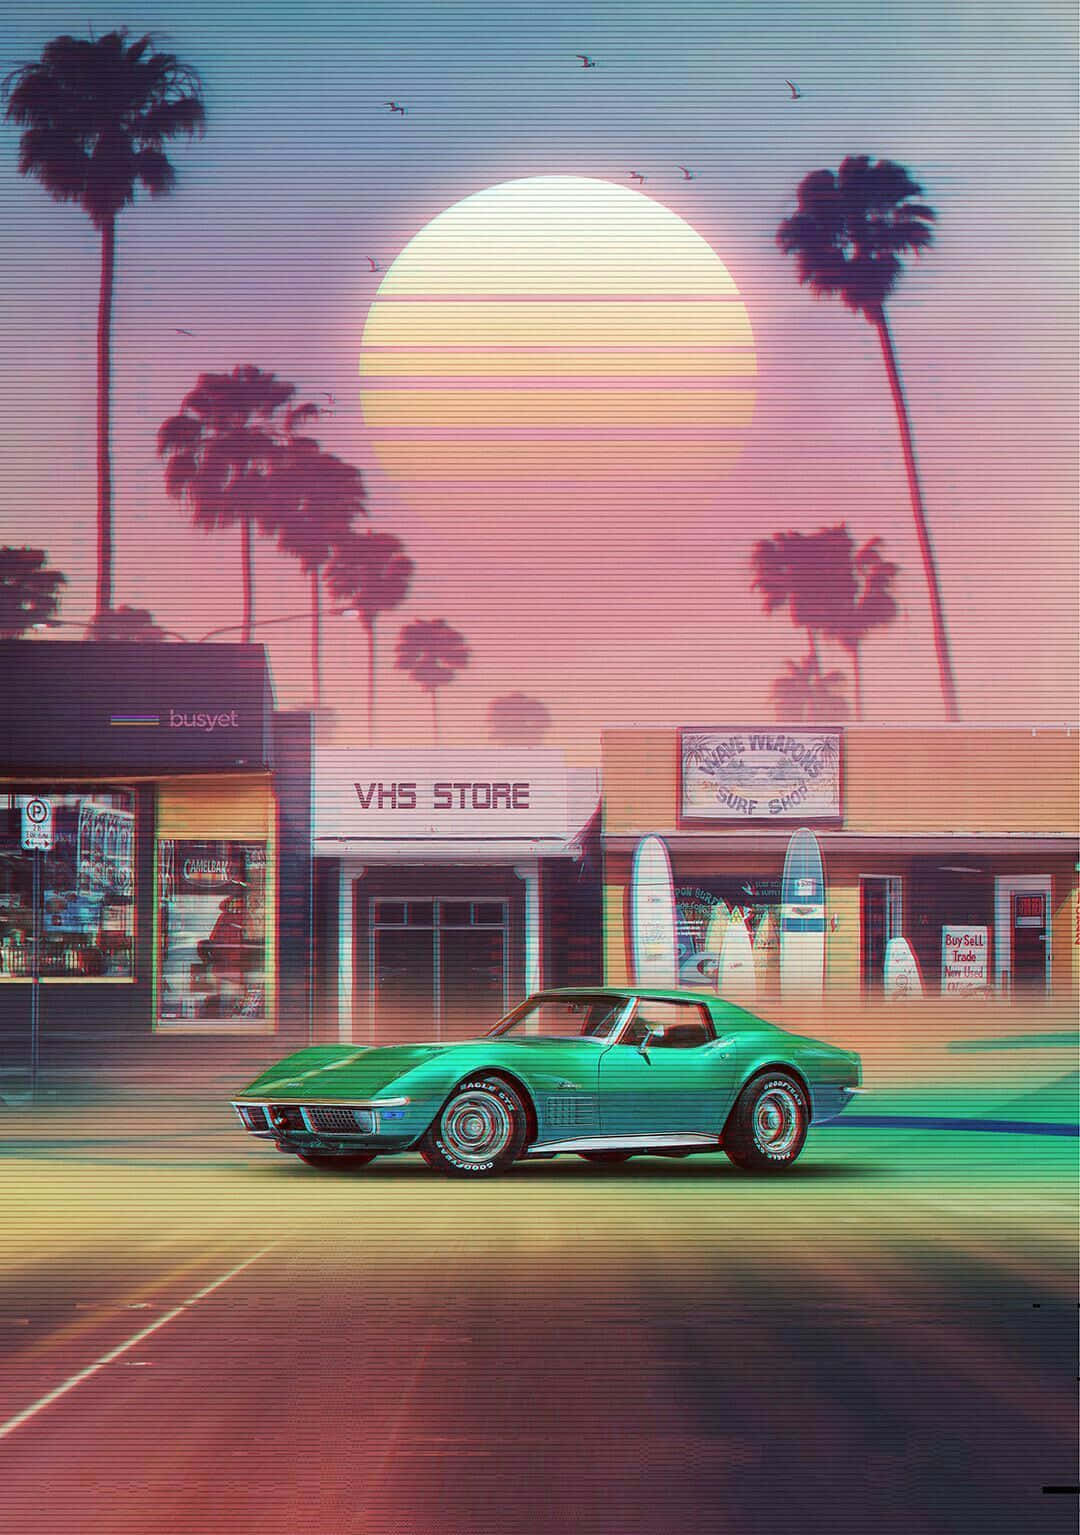 Has been my wallpaper for some time now love the 80s vibe it has   rphonewallpapers